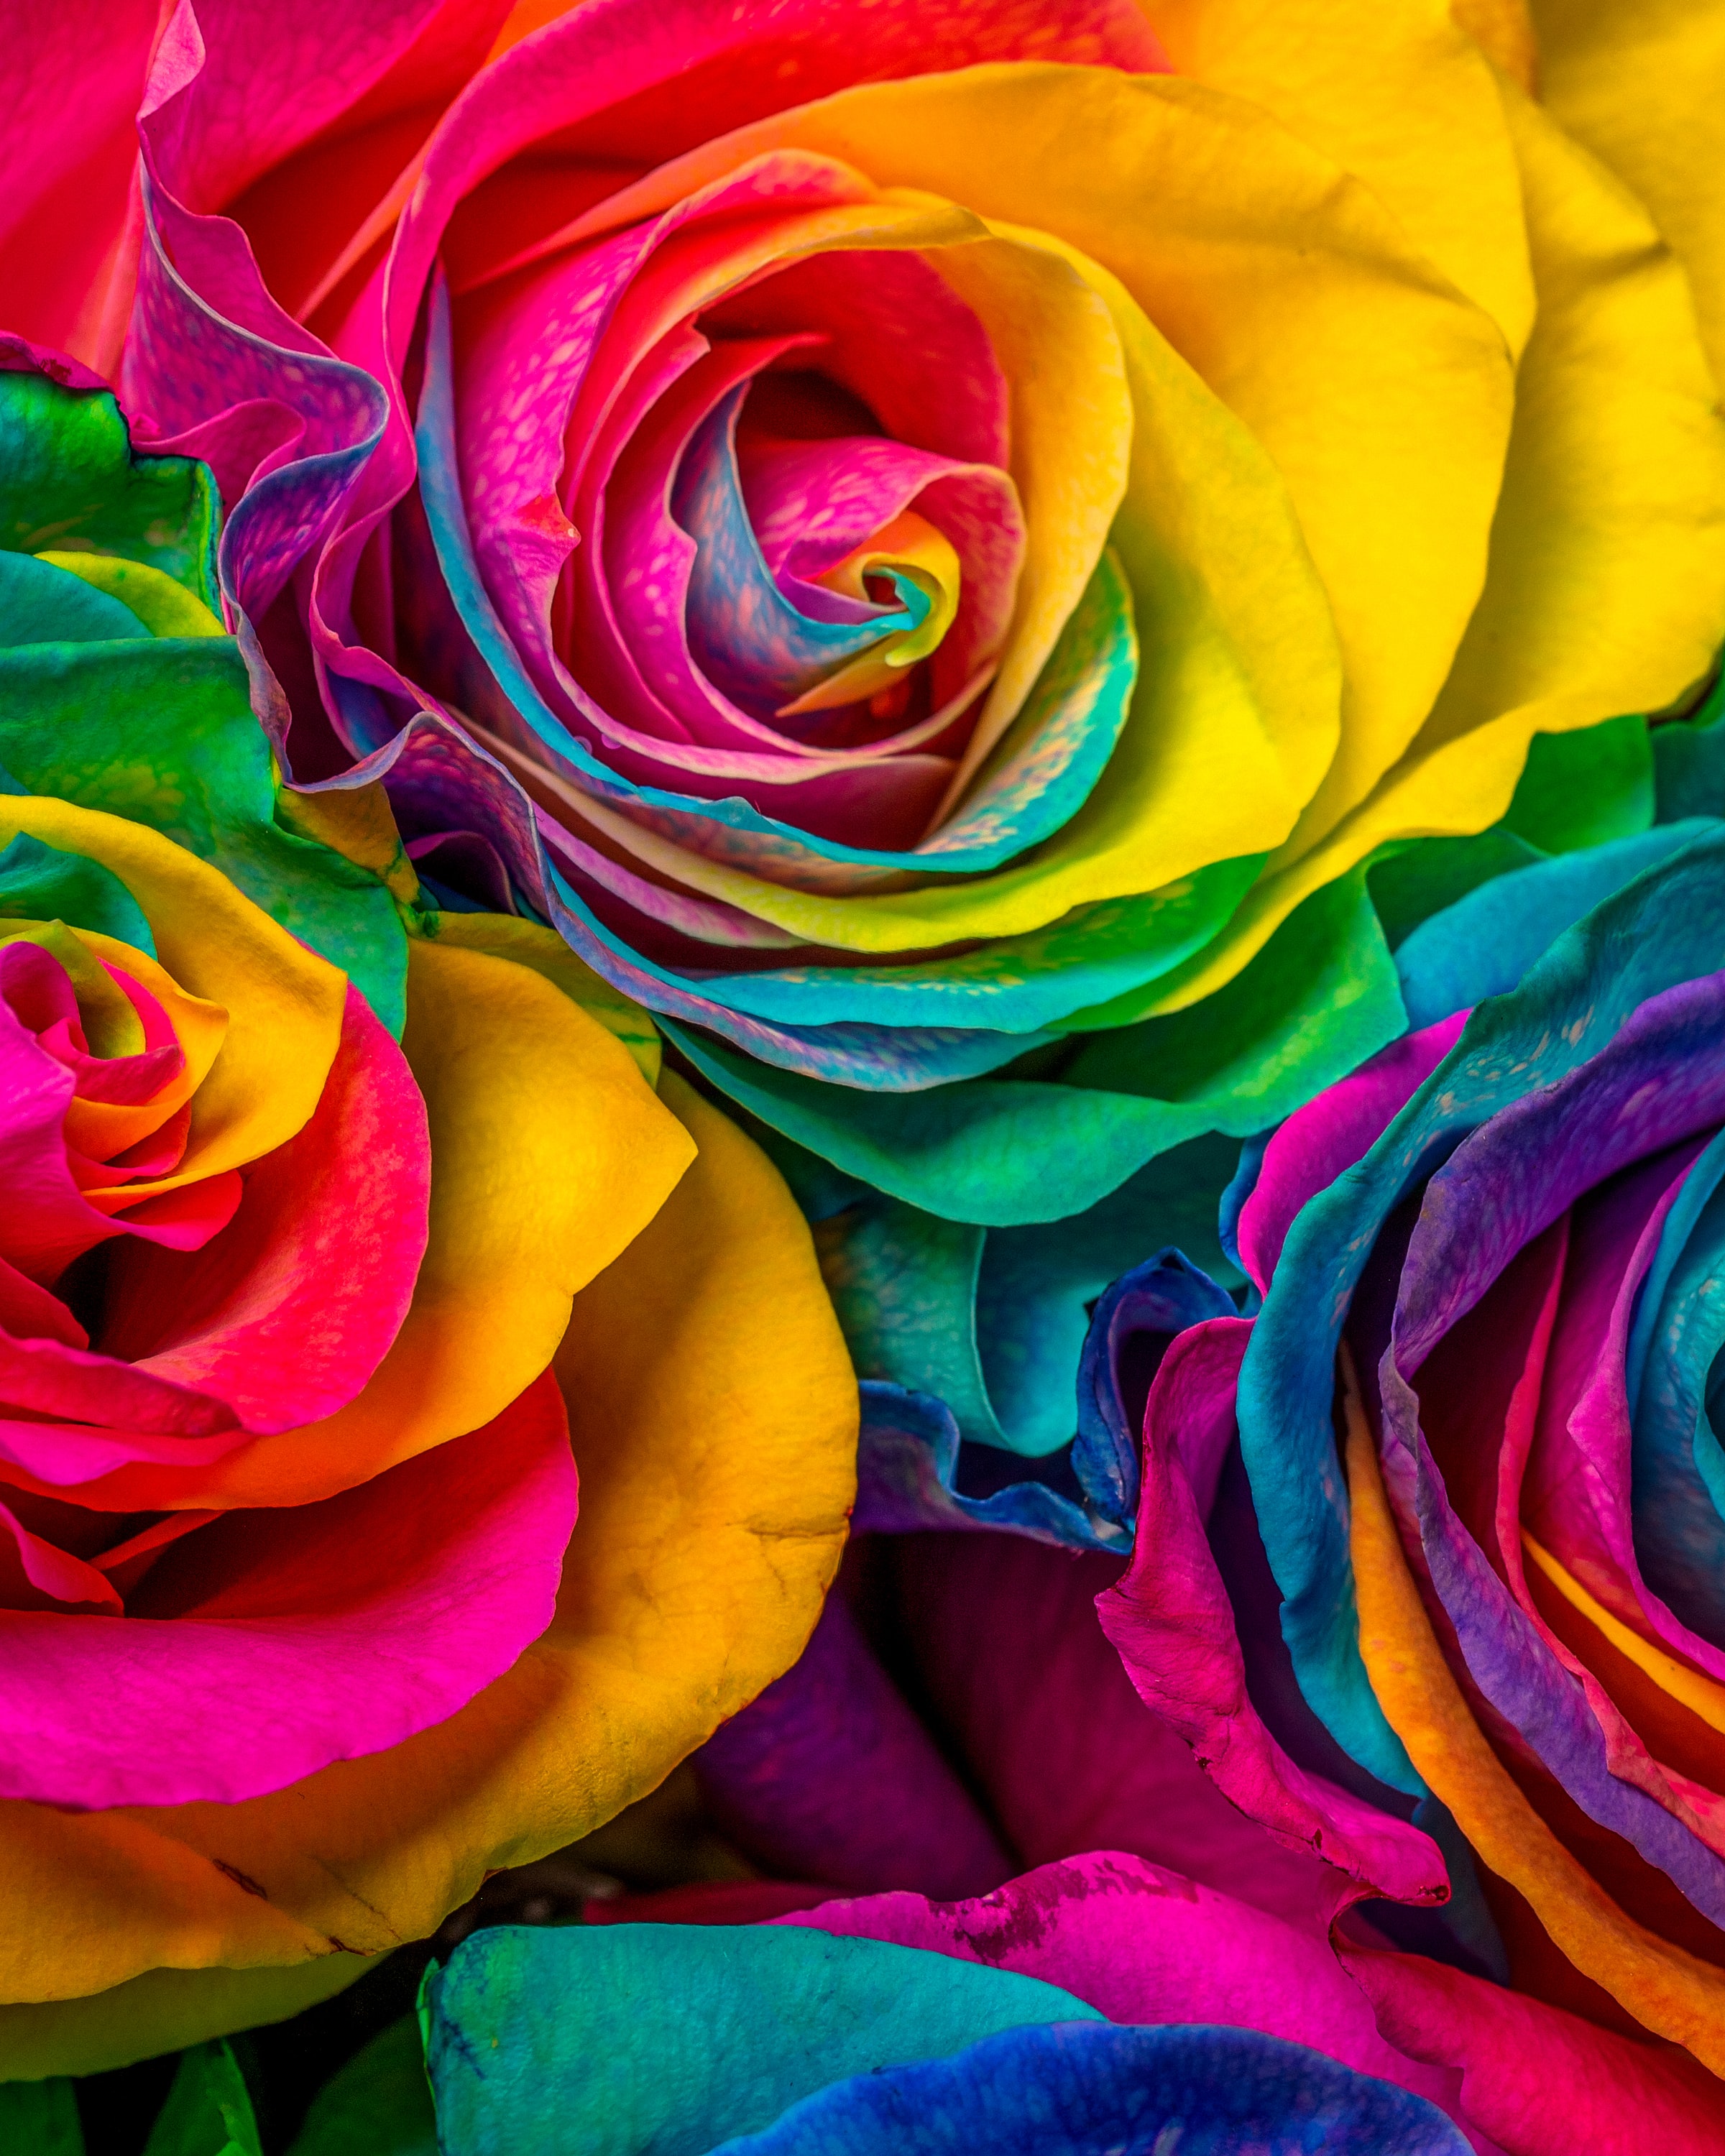 96565 free wallpaper 1440x2560 for phone, download images flowers, motley, multicolored, rose 1440x2560 for mobile